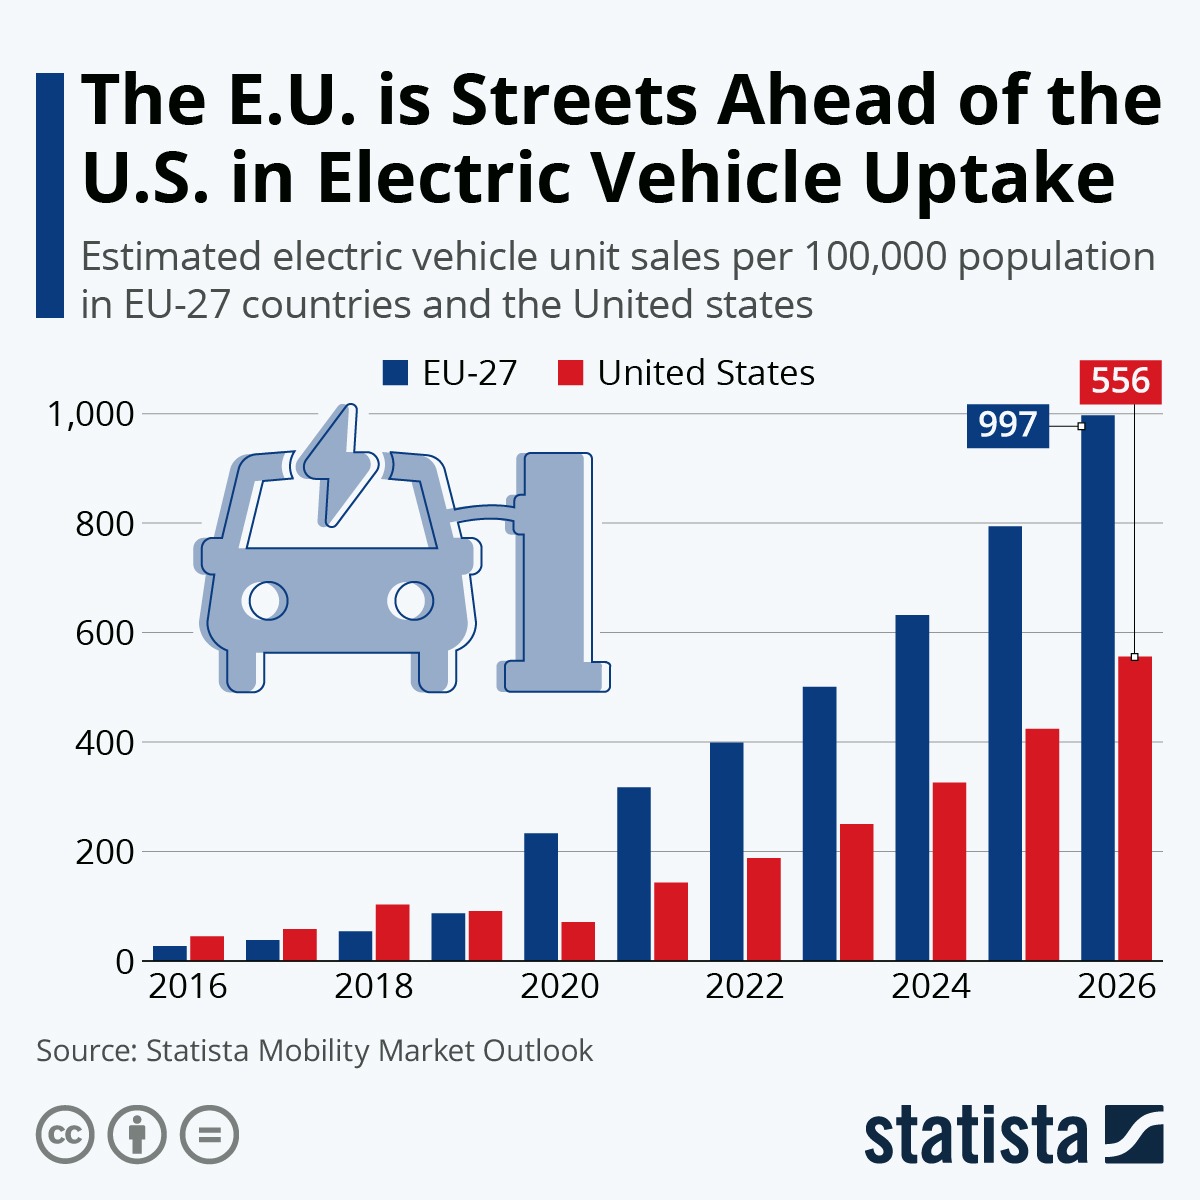 Read & Share The E.U. is Streets Ahead of the U.S. in Electric Vehicle